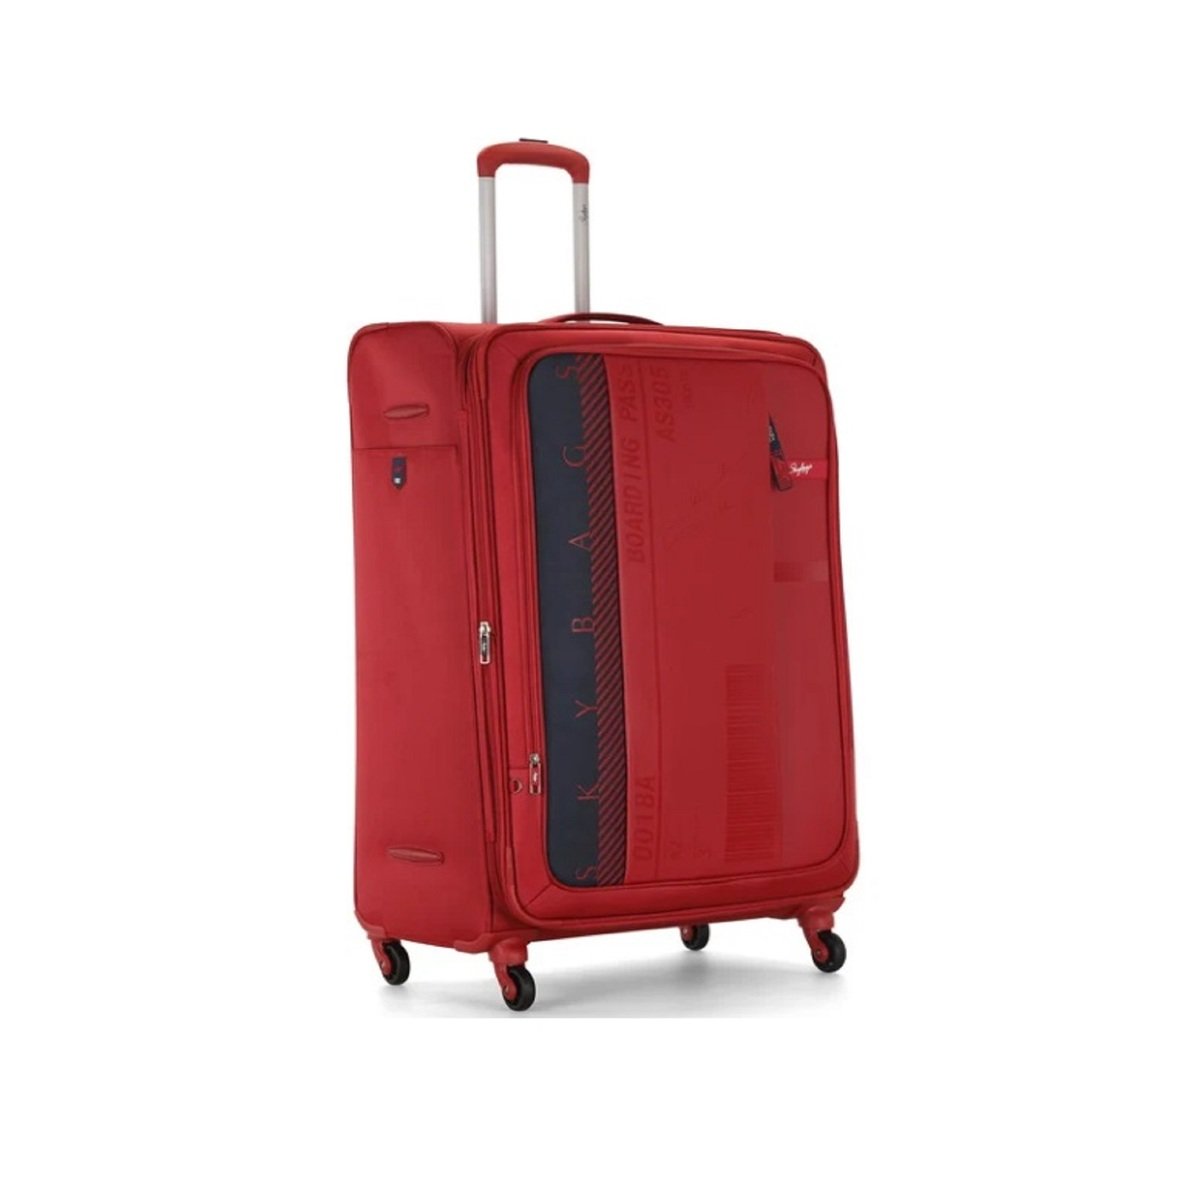 Skybags Airway Soft Trolley, 81 cm, Red